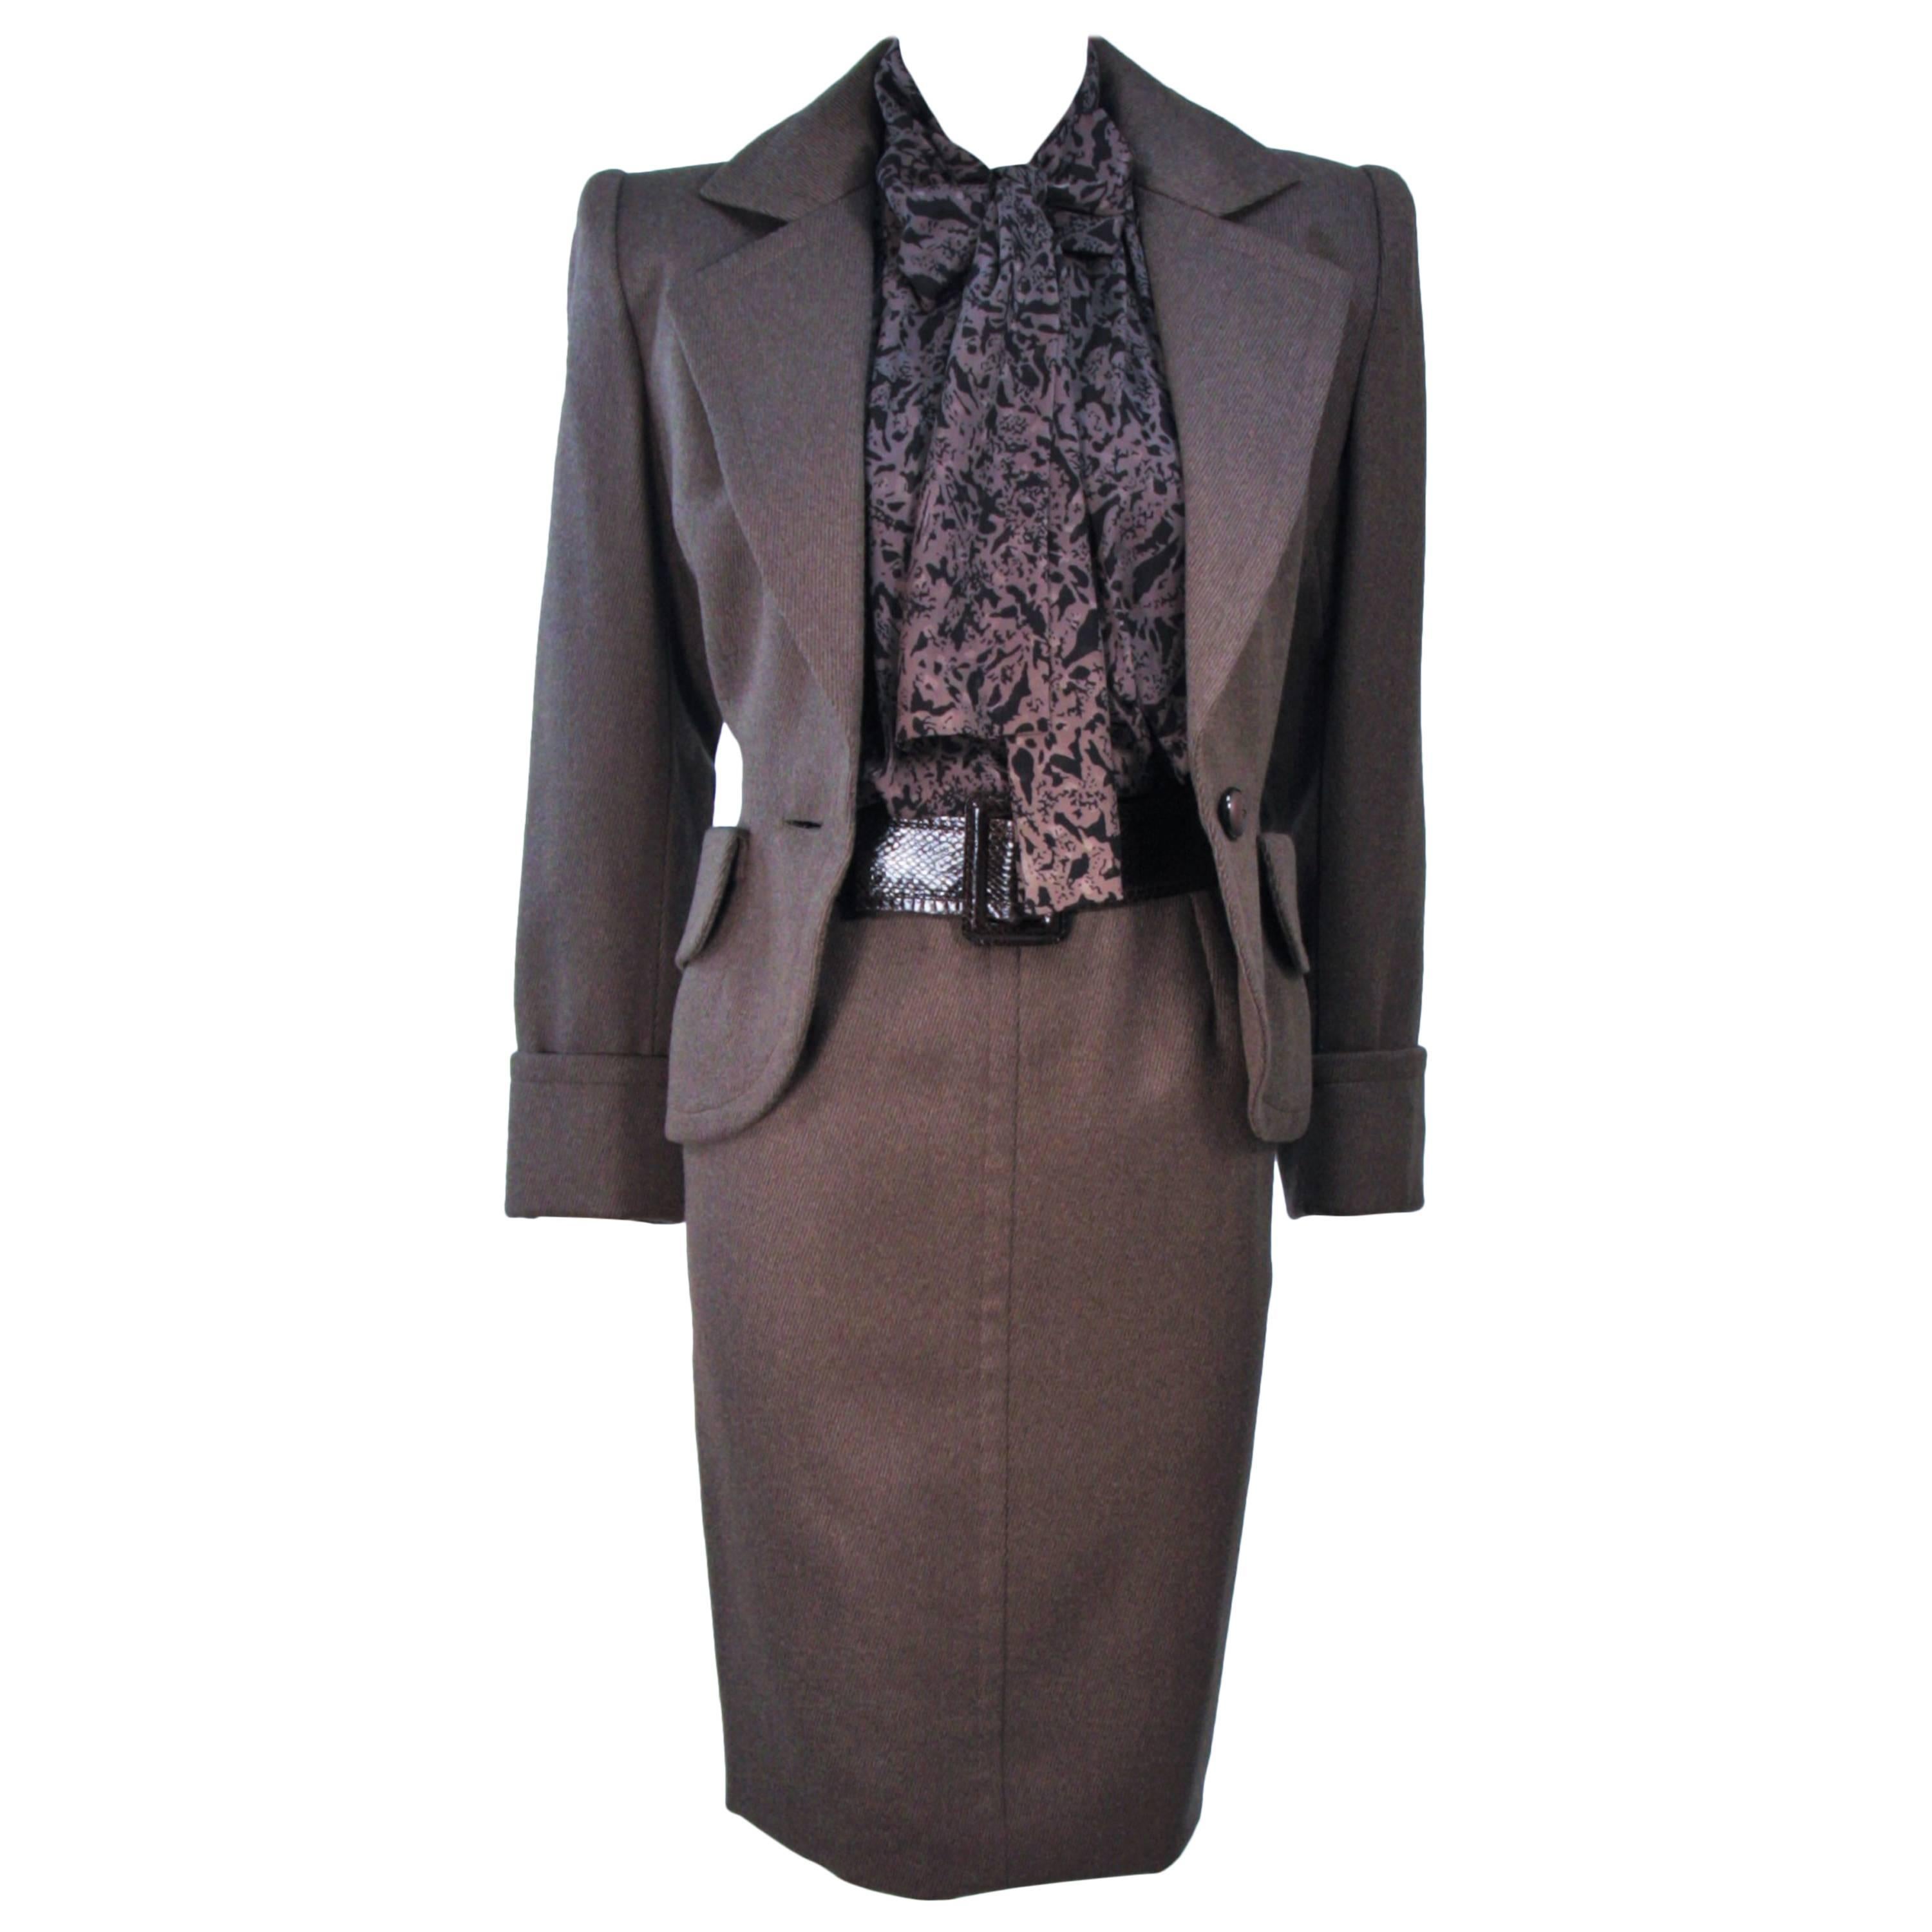 GIVENCHY COUTURE Wool Silk & Snakeskin 4pc Skirt Suit with Belt Size 4-6